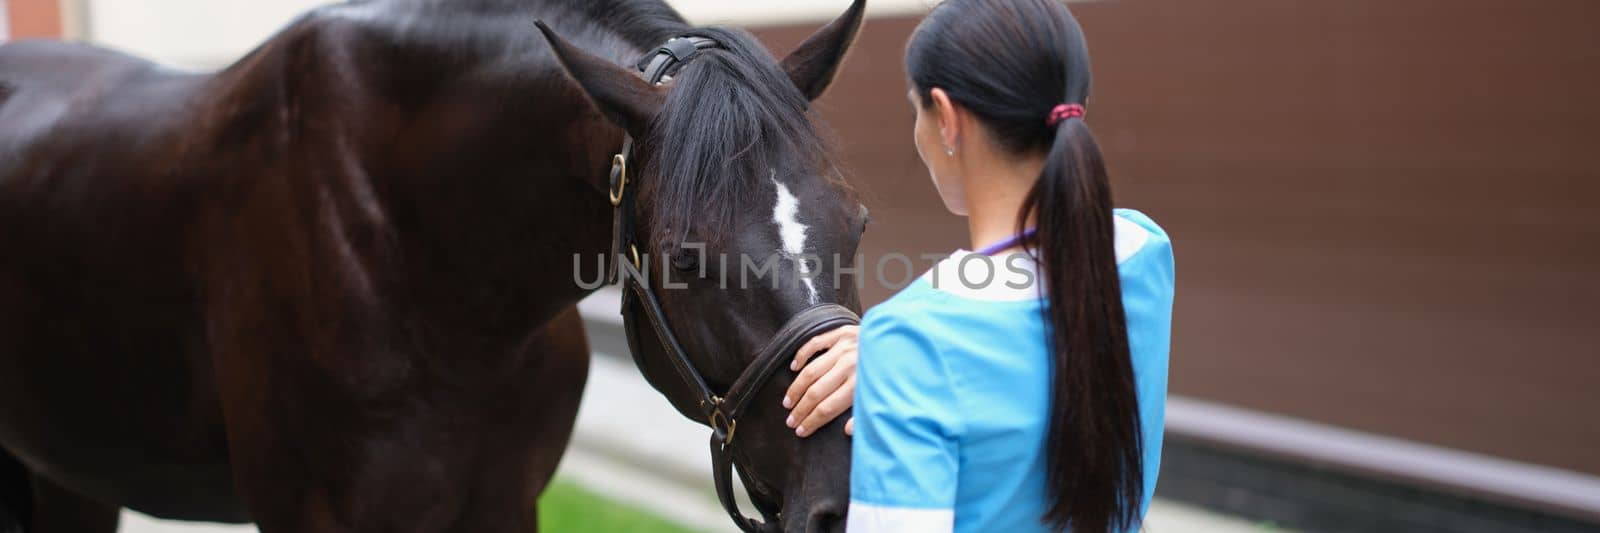 Veterinarian strokes and communicates with horse outdoors. Medical examination services and assistance to horses concept